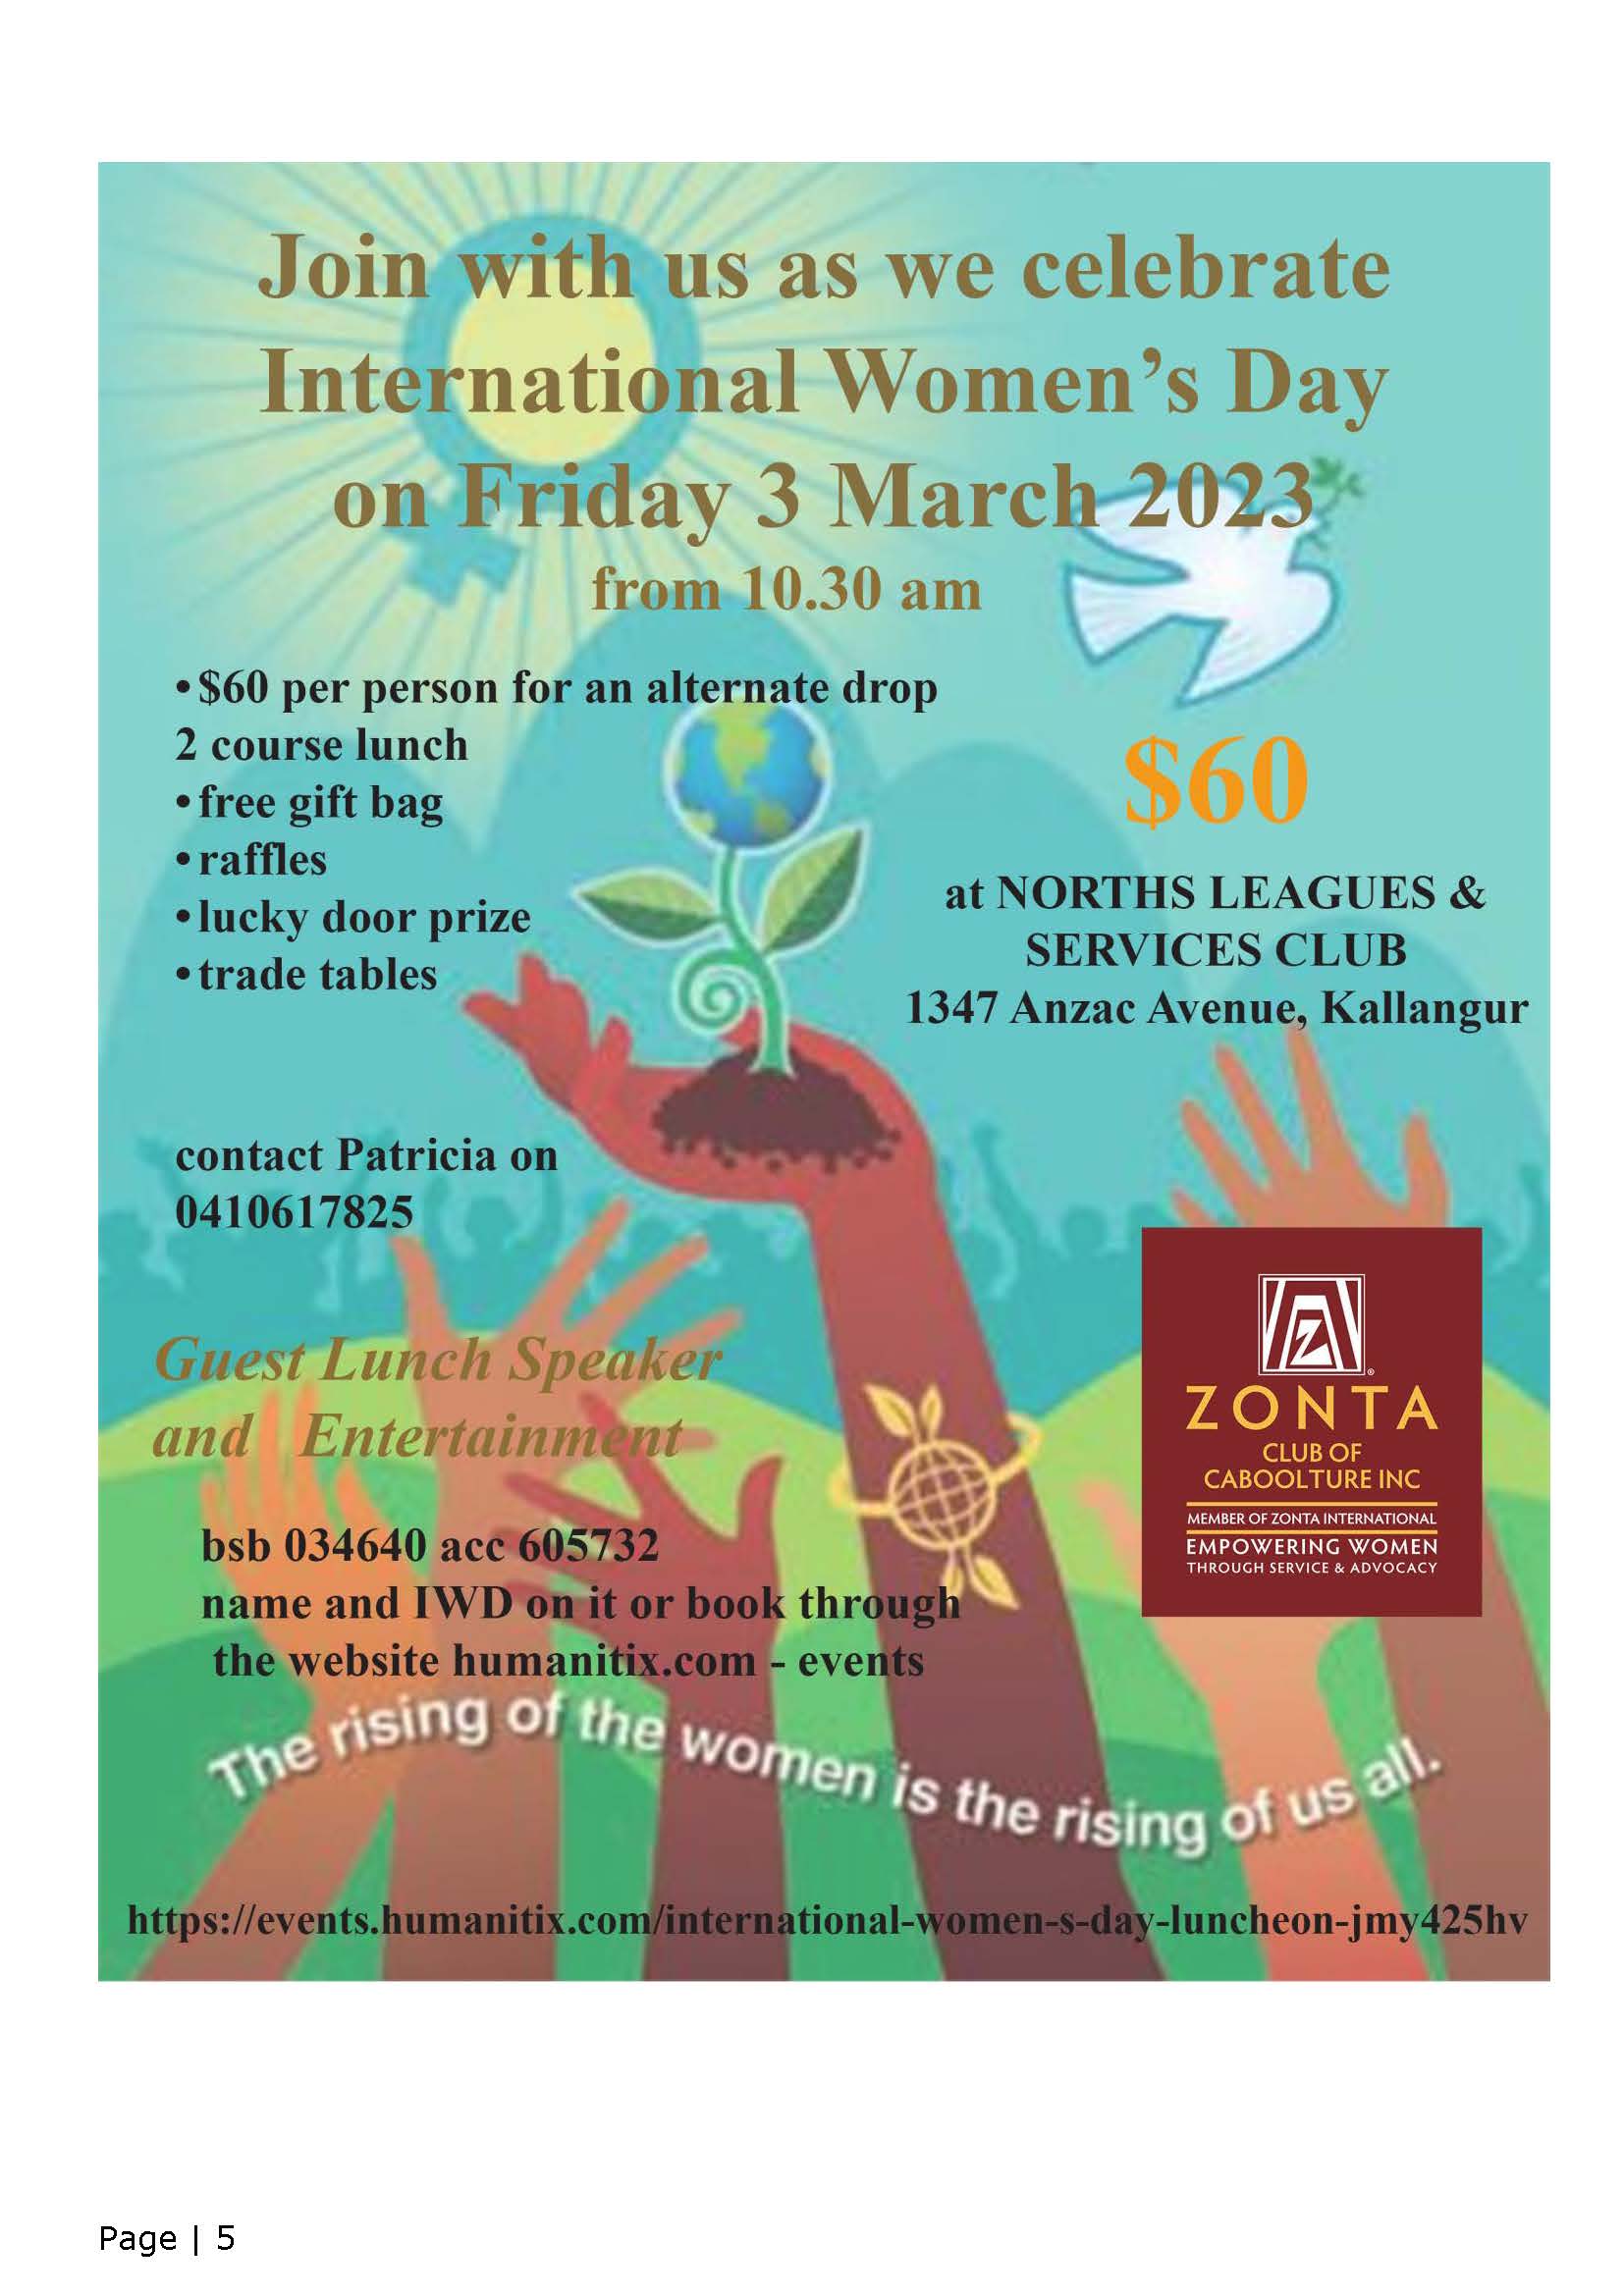 IWD 2023 Lunch - Caboolture @ Norths Leagues & Services Club